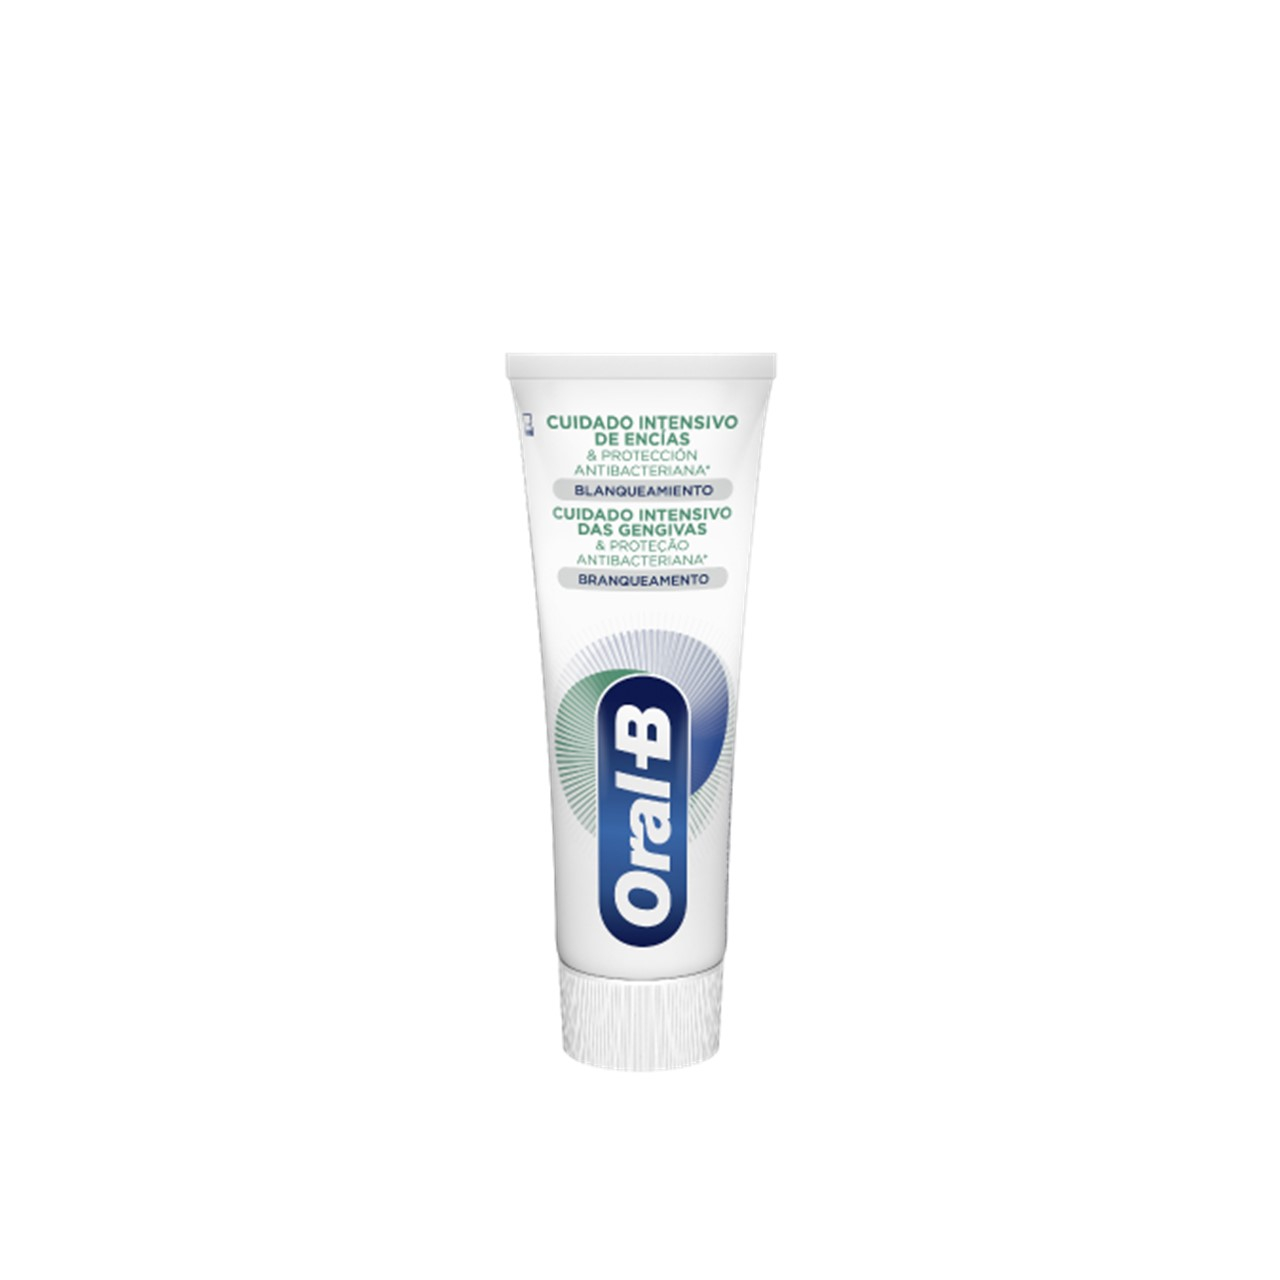 Oral-B Gum Care & Antibacterial Protection Whitening Toothpaste 75ml (2.5 fl oz)